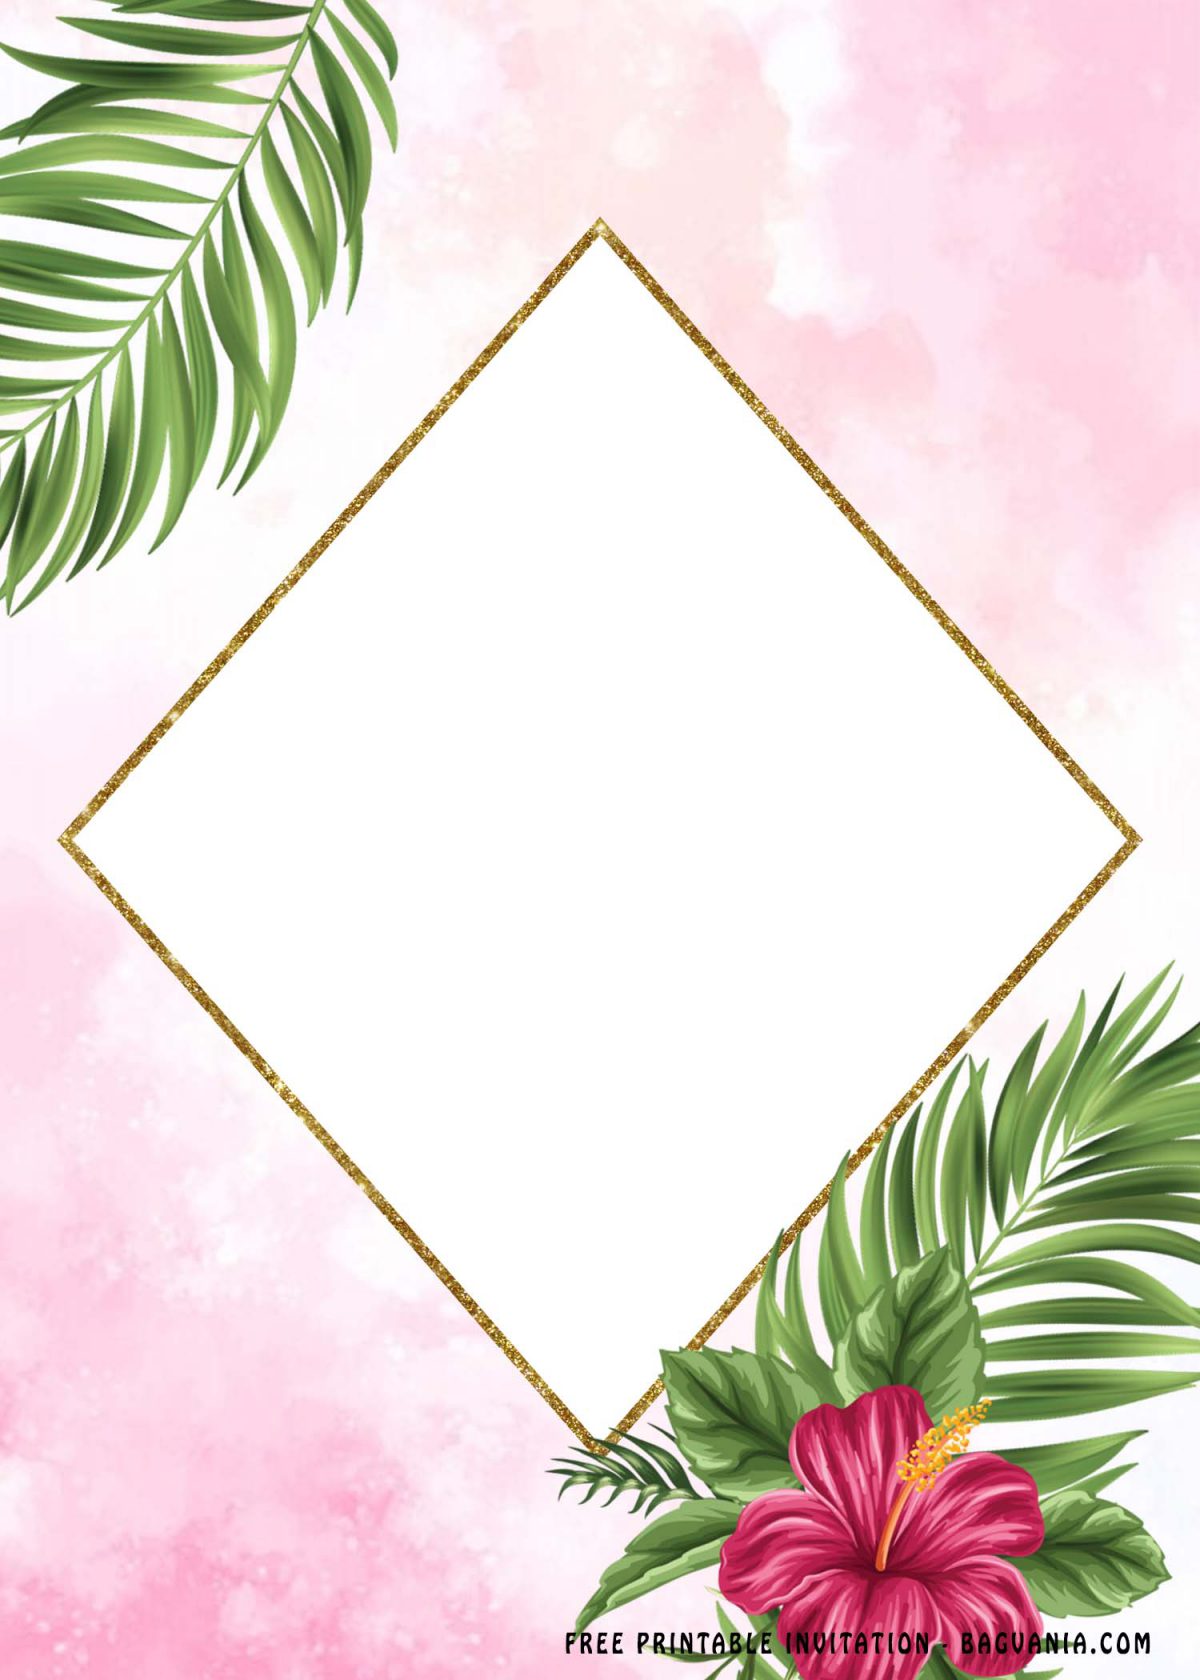 Free Printable Tropical Palm Party Invitation Templates With Gold Rhombus Shaped Text Frame